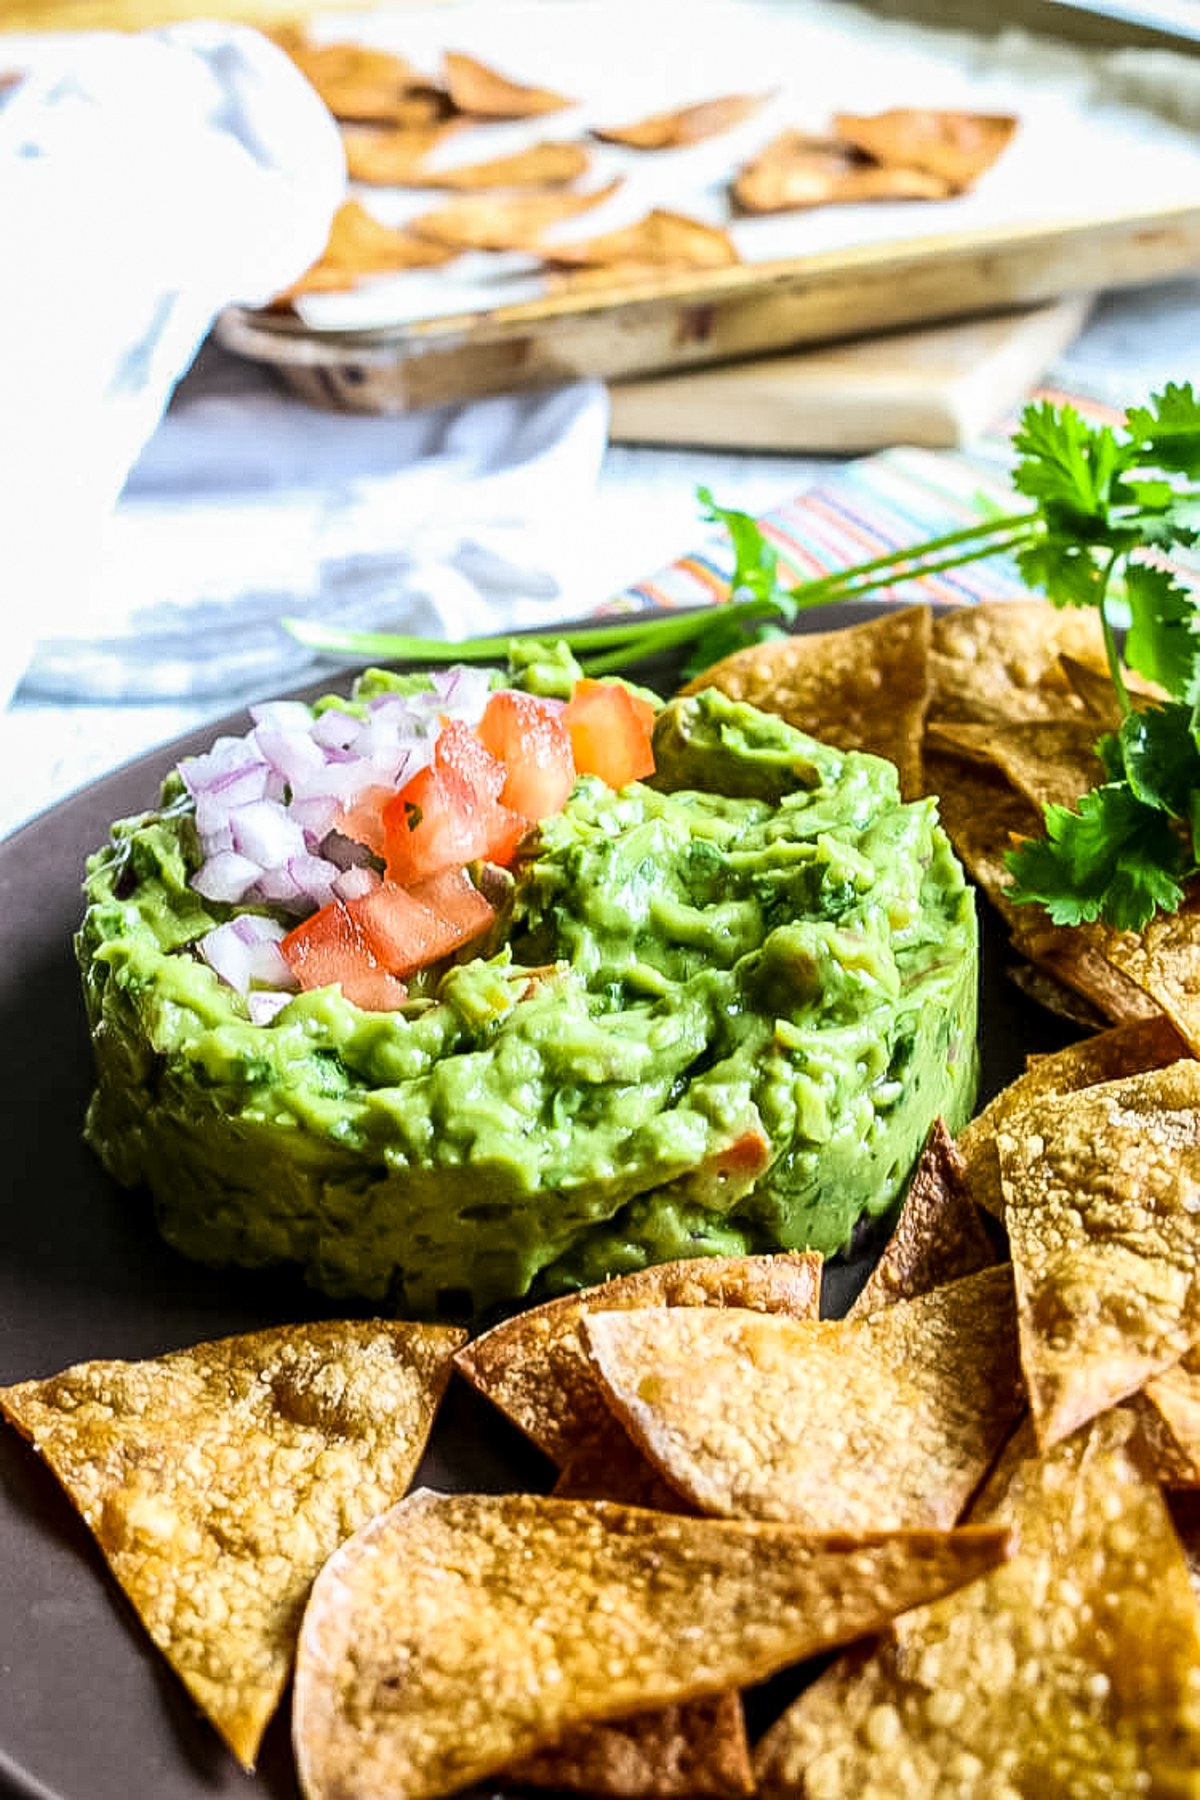 tortilla chips laying on a brow platter next to guacamole, in the back a baking sheet has freshly made chips.